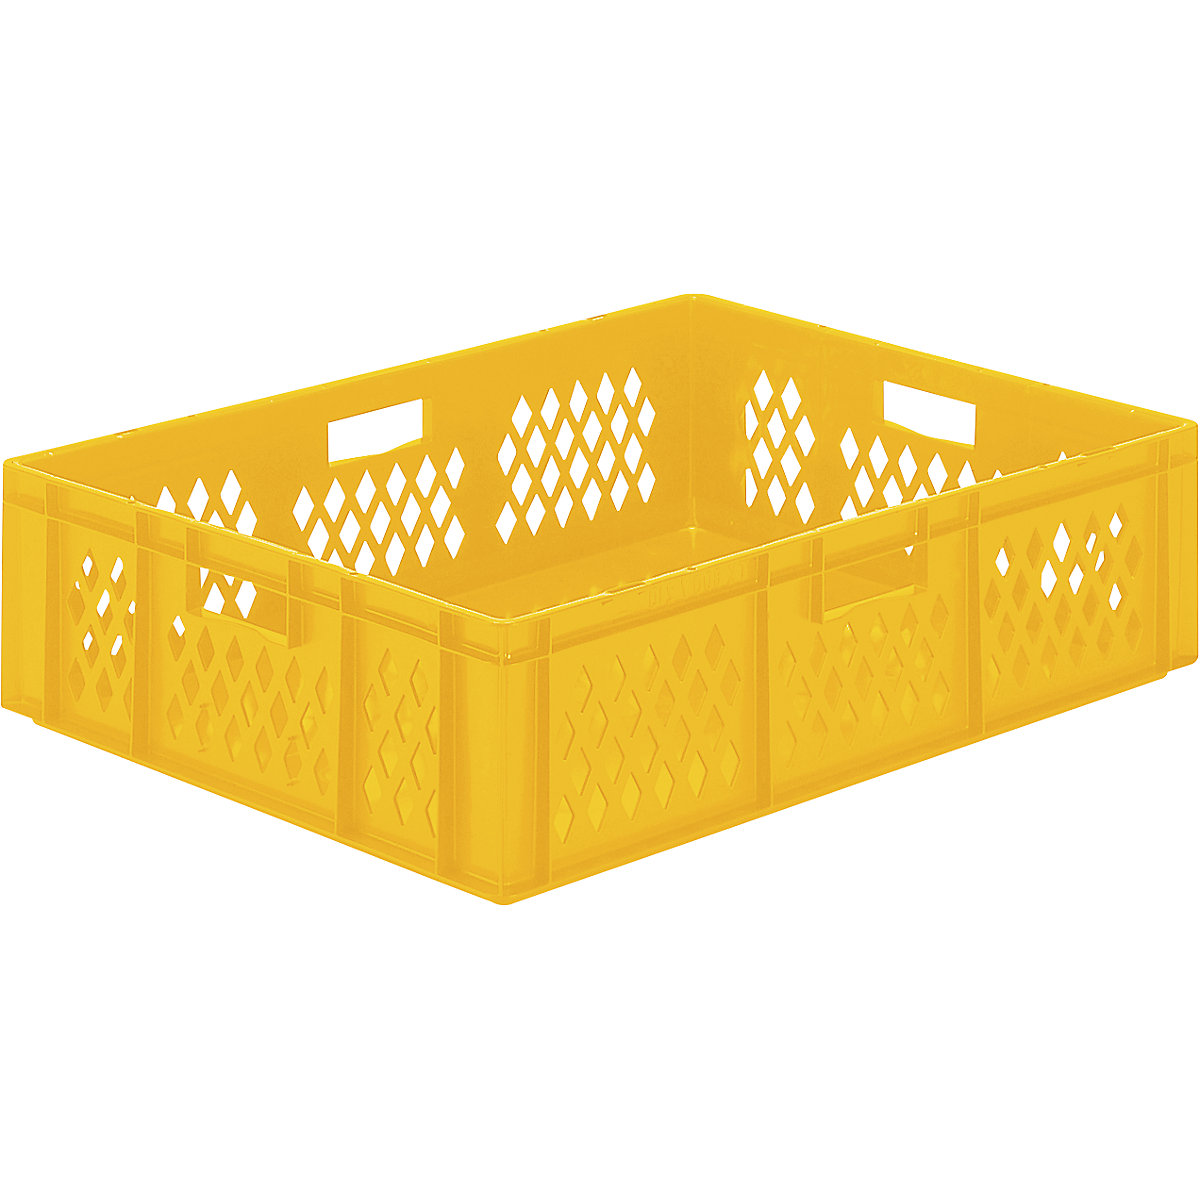 Euro stacking container, perforated walls, closed base, LxWxH 800 x 600 x 210 mm, yellow, pack of 2-7